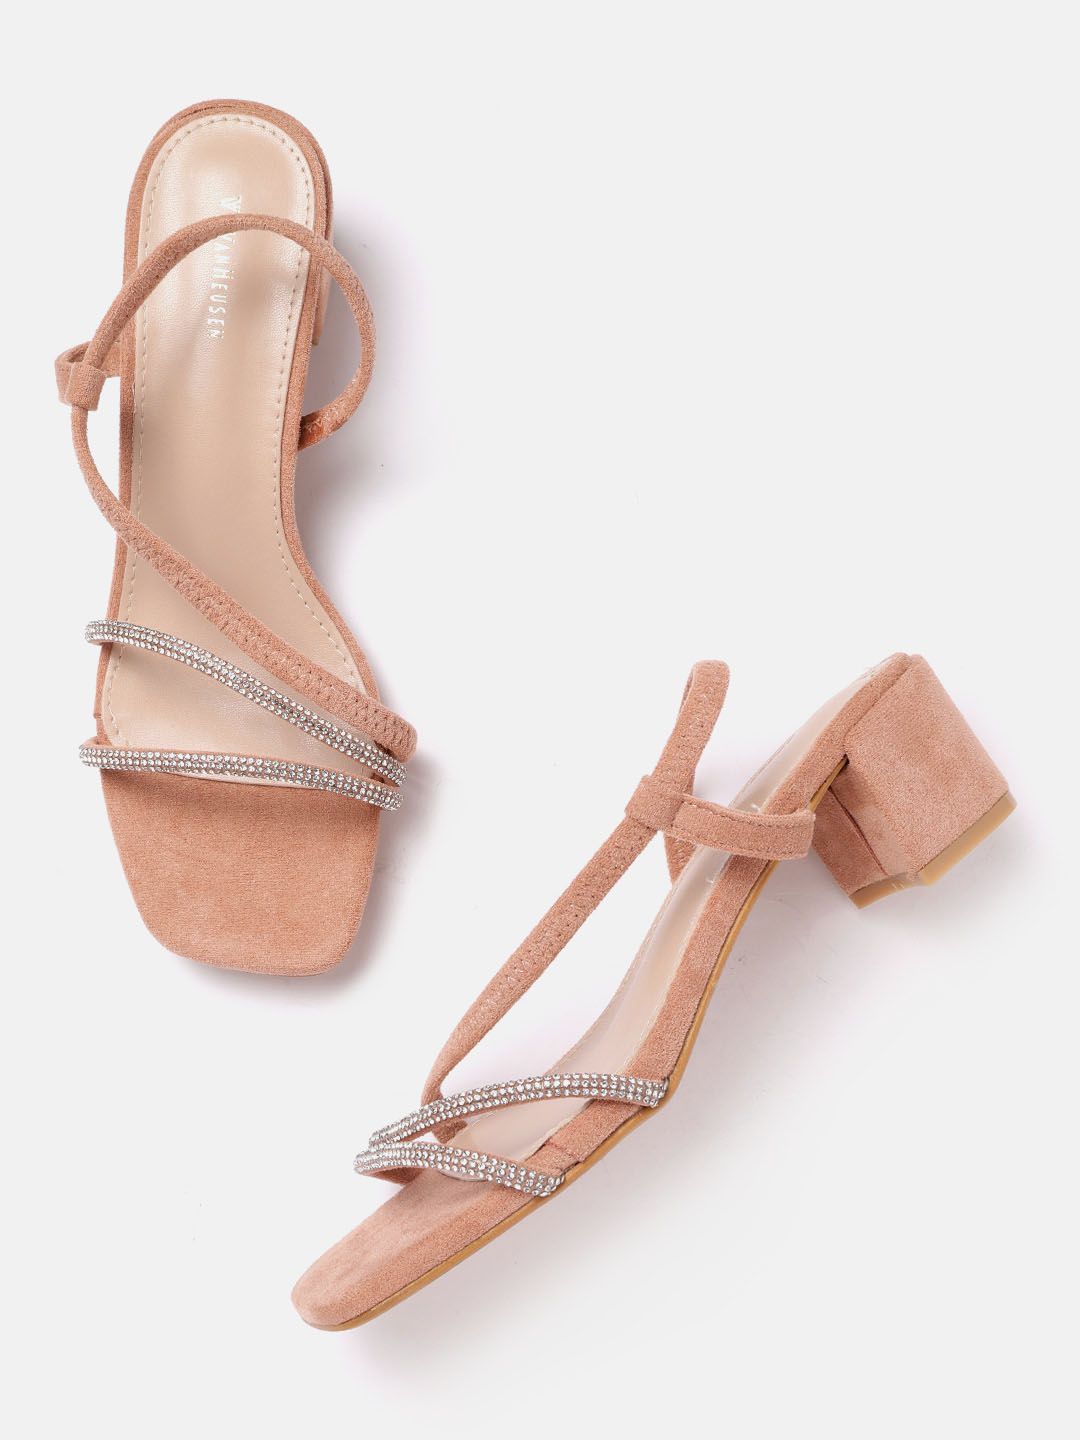 Van Heusen Woman Peach-Coloured with a Tinge of Tan Suede Finish Embellished Block Heels Price in India